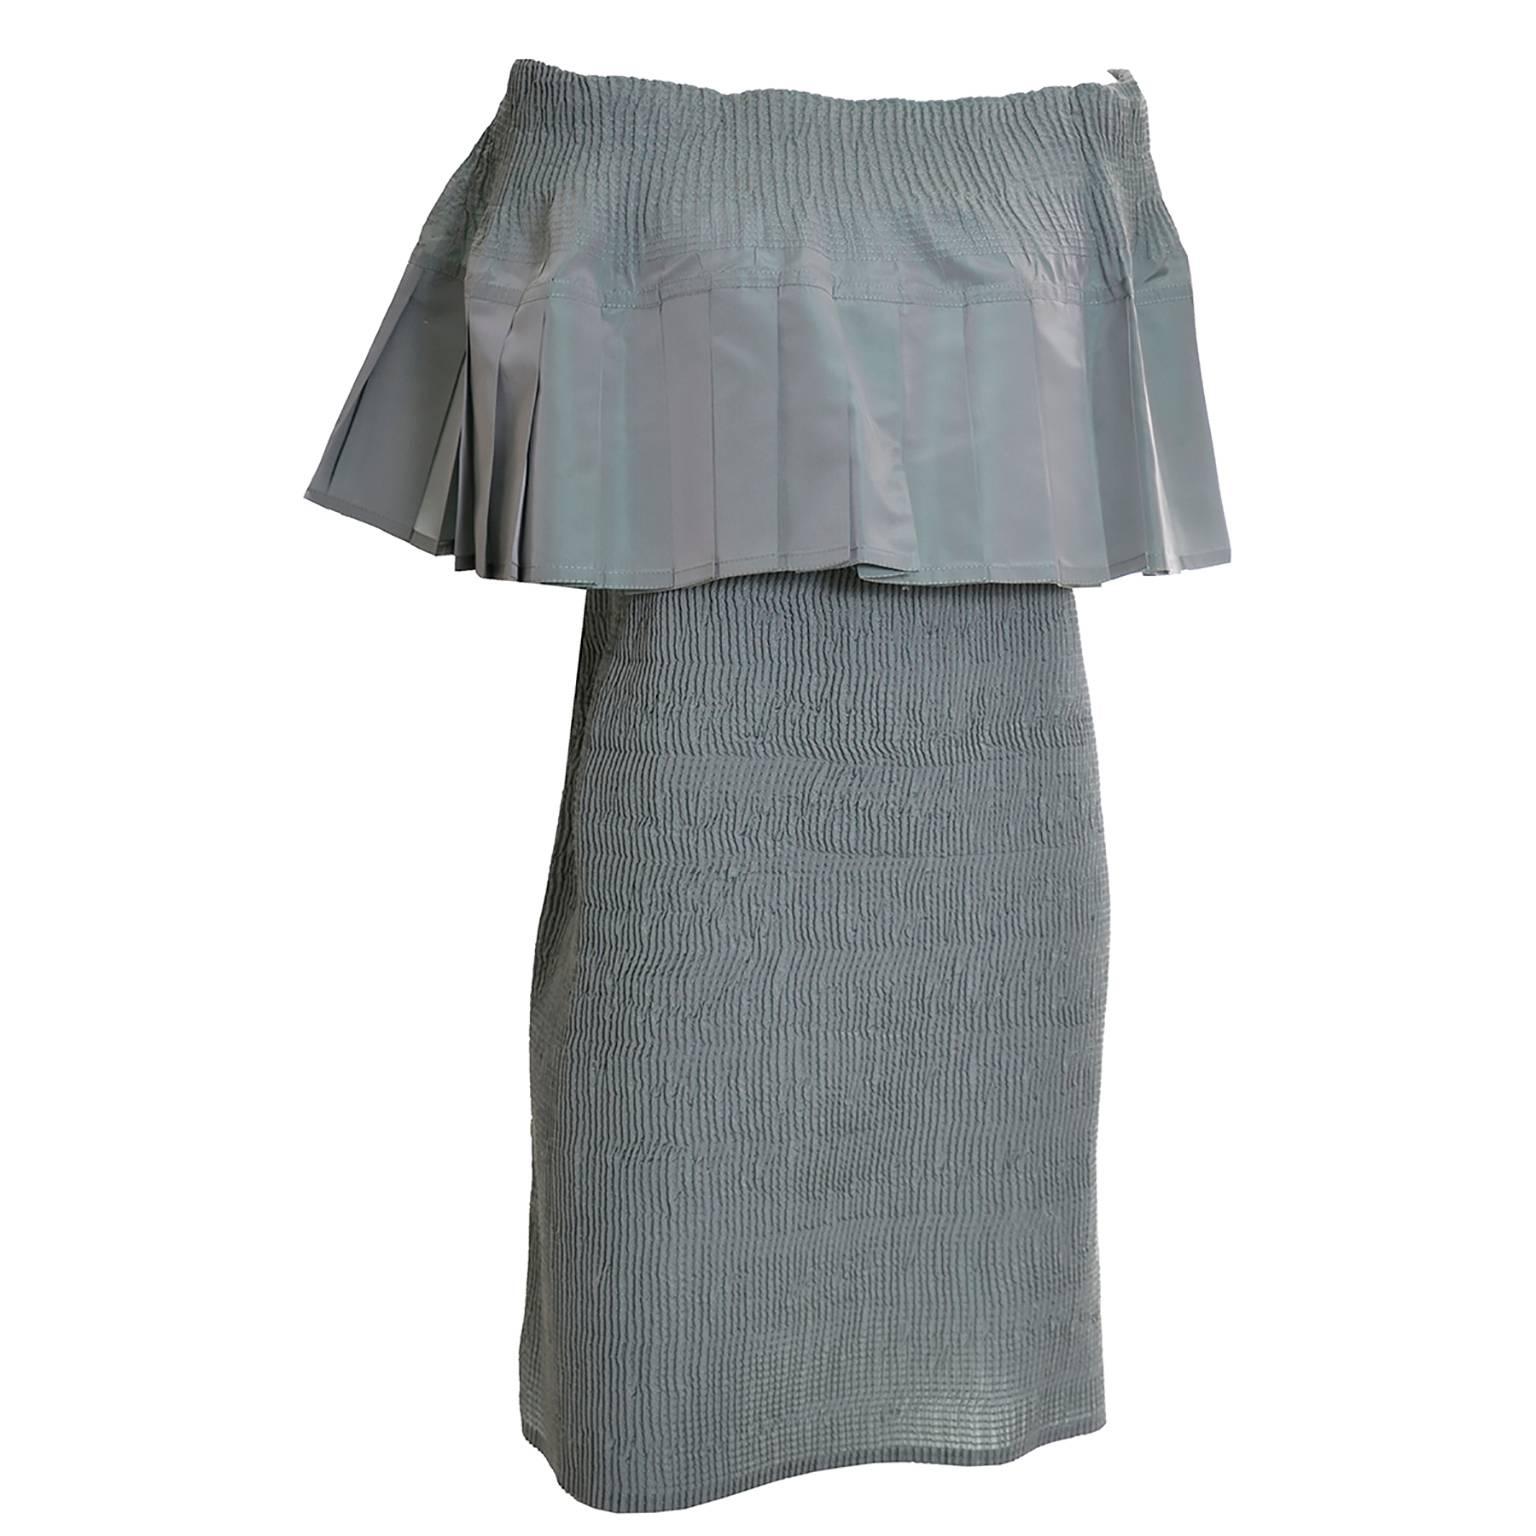 This pistachio green iridescent taffeta satin dress was designed by Angelo Tarlazzi in the 1980's.  This perfect spring/summer dress would be a great addition to your wardrobe.  This piece is exquisitely made with shirring and a wide off shoulder